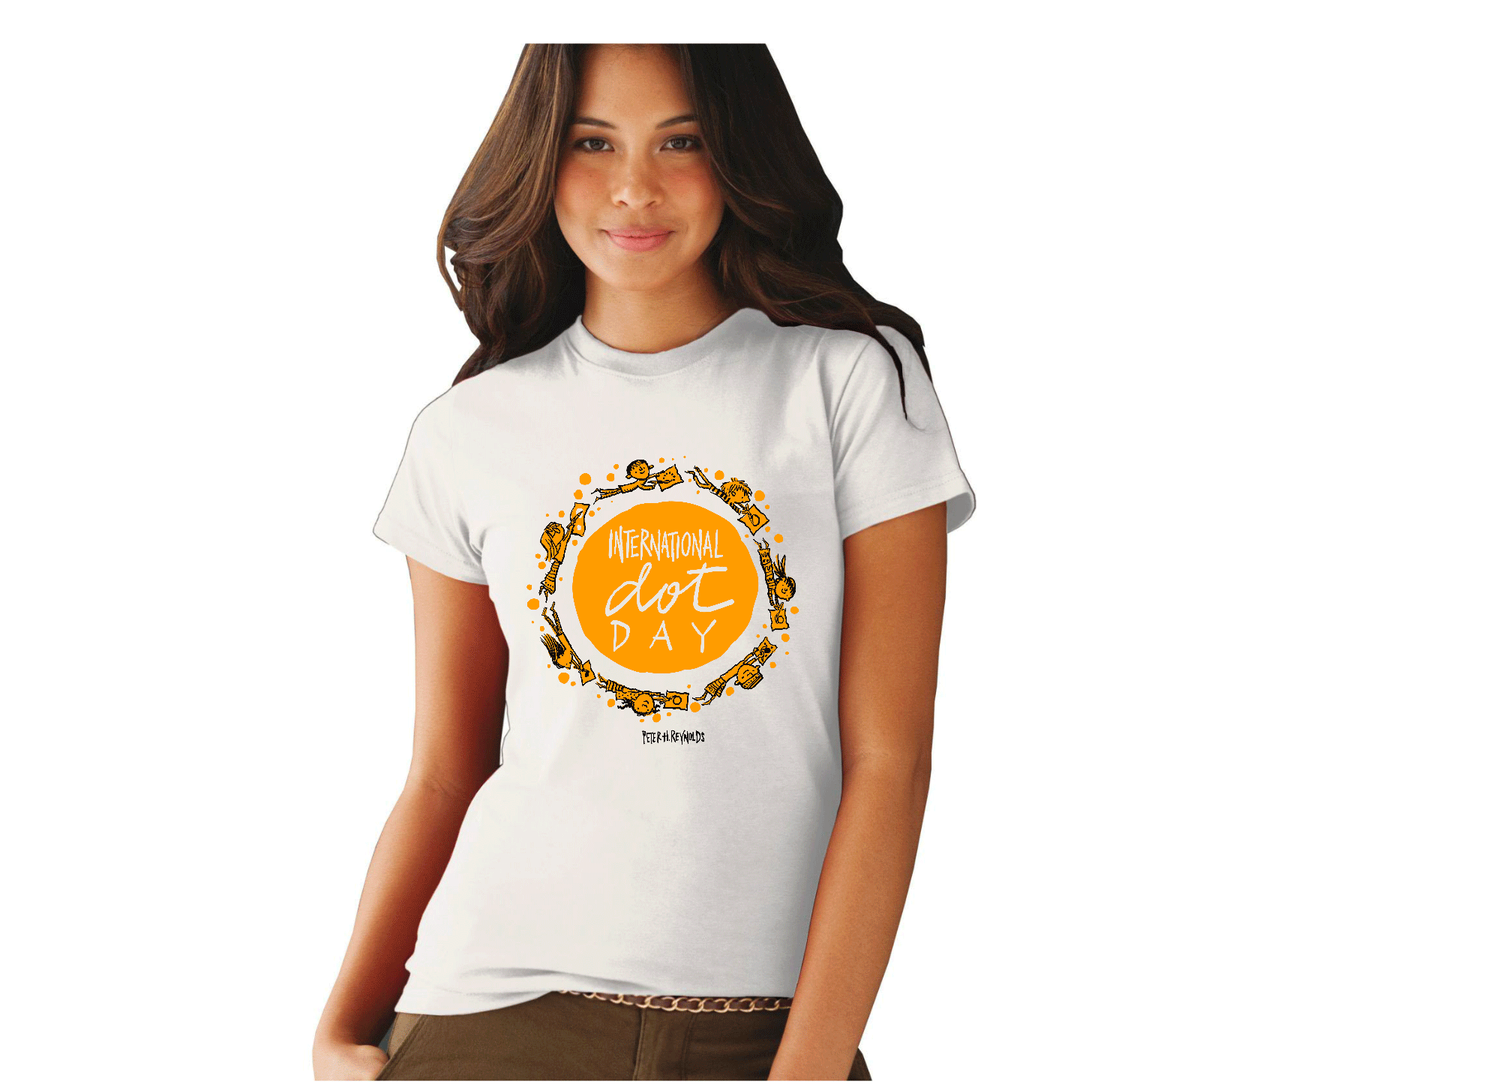 Dot T-shirt, based on the book THE DOT by Peter H. Reynolds for